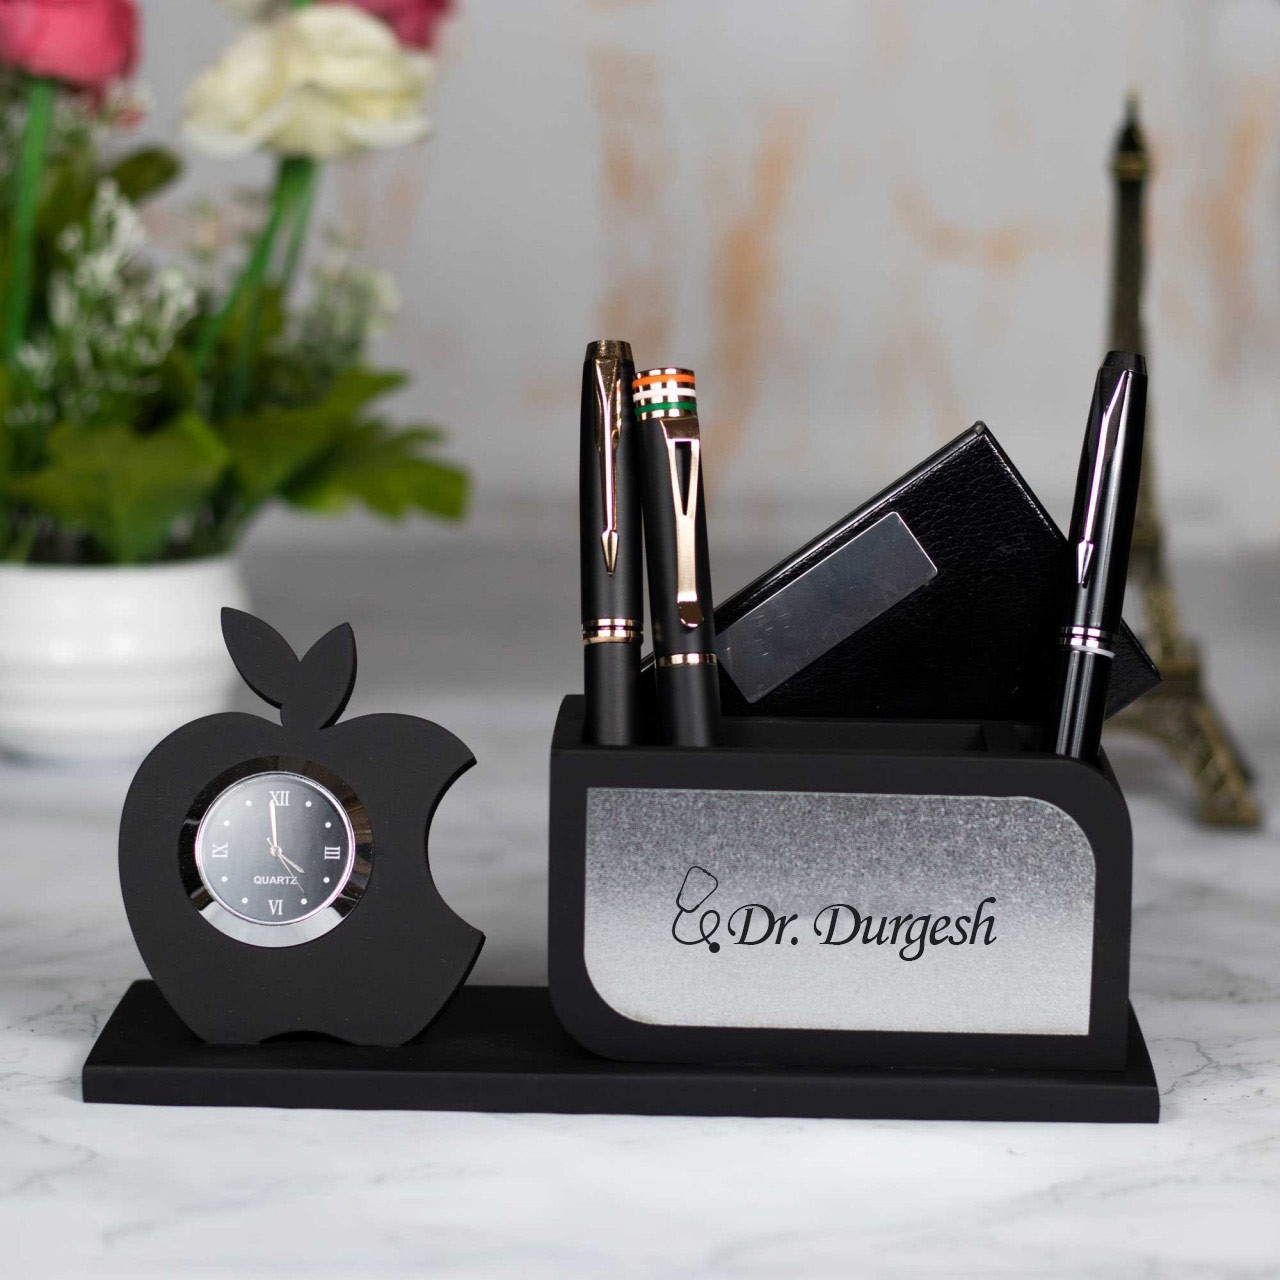 Personalized Apple Table Stand Clock For Doctors